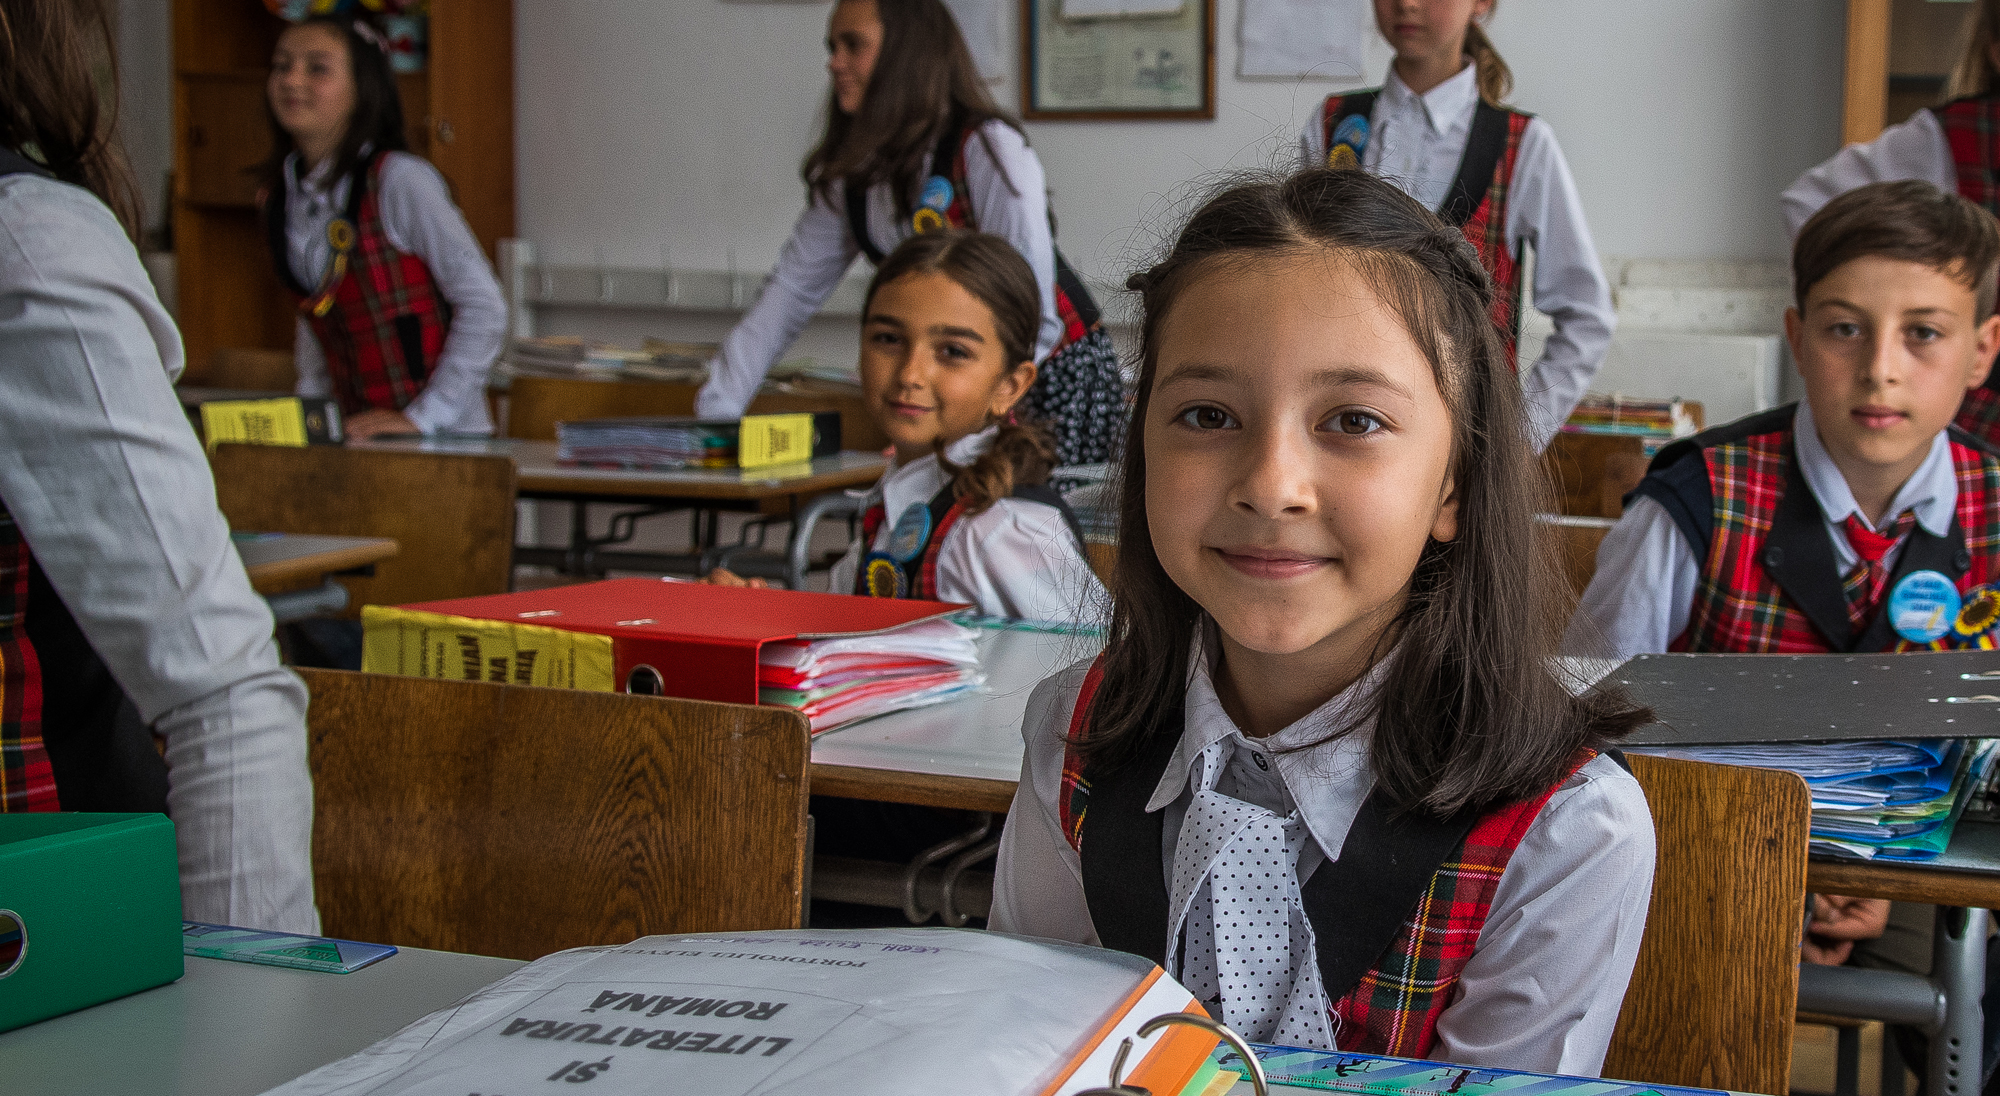 https://downloads.unicef.org.uk/wp-content/uploads/2018/10/report-card-inequality-in-education-school-romania.jpg